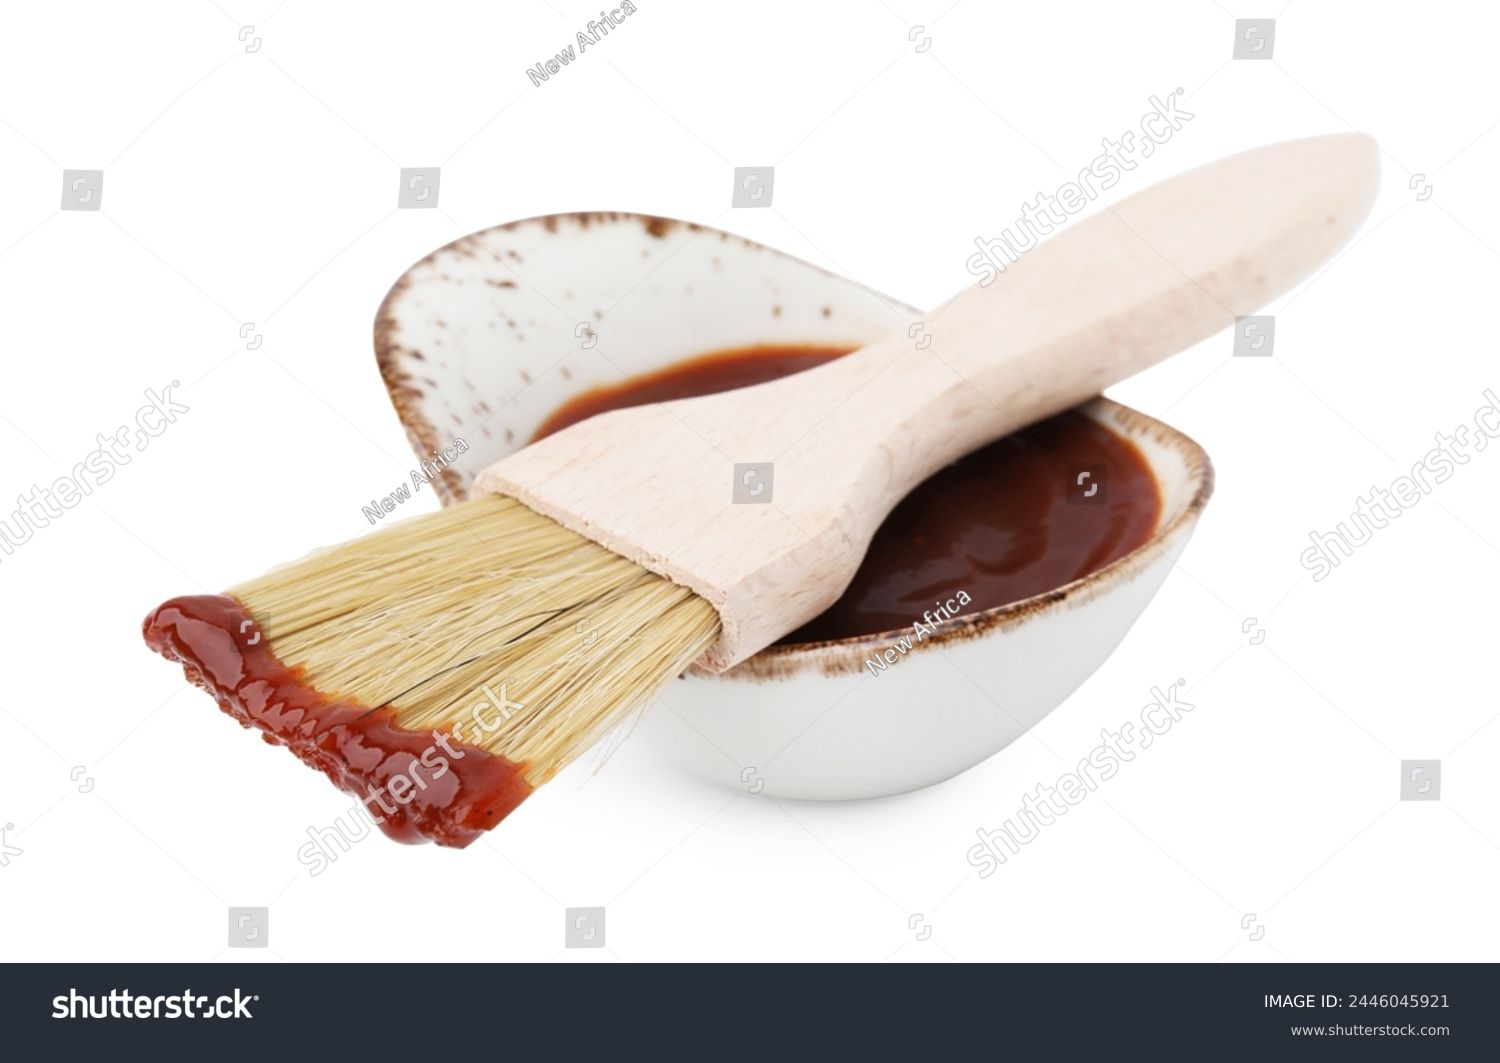 Marinade in gravy boat and basting brush isolated on white #2446045921